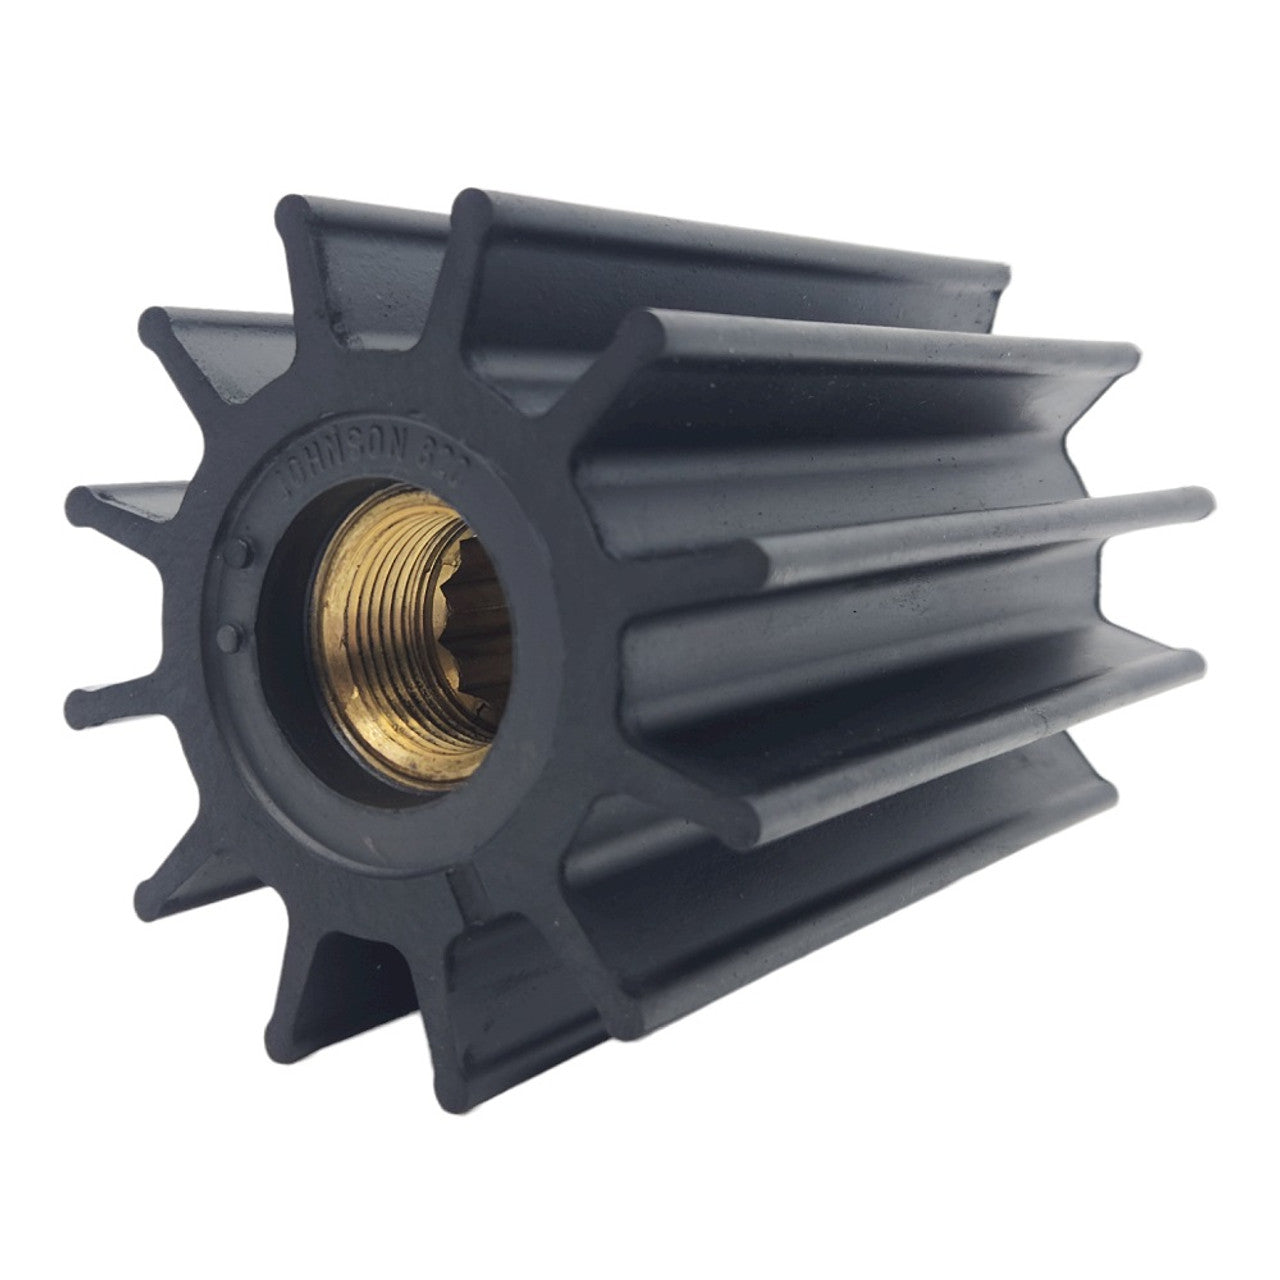 JOHNSON Impellers 09-820B (For F9 Pumps)